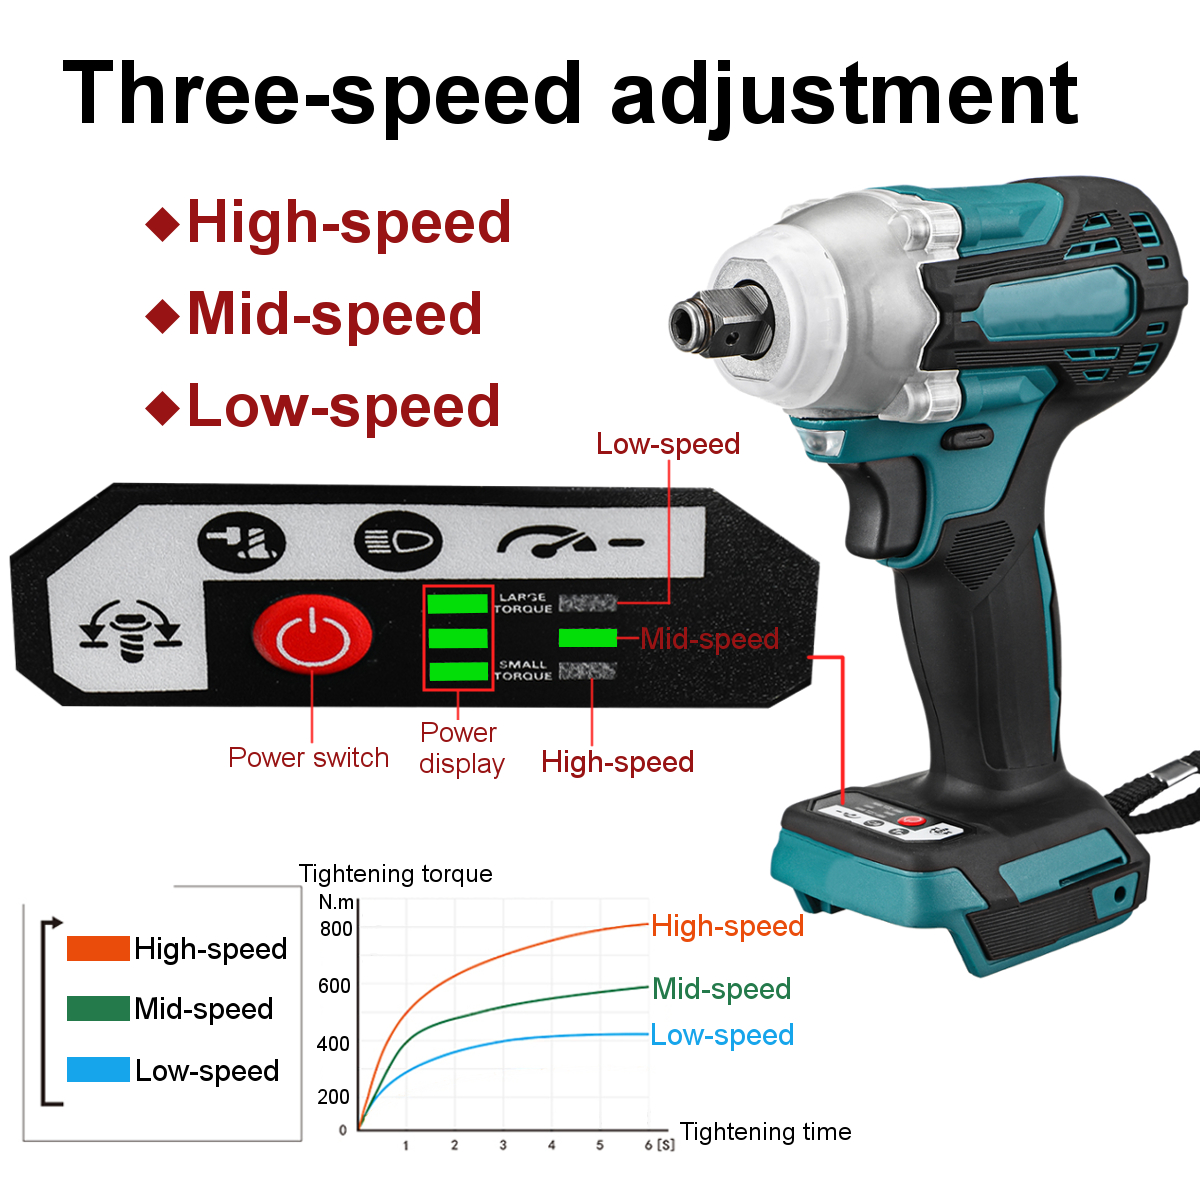 DTW300-2-in1-18V-800Nm-Li-Ion-Brushless-Cordless-12quot-Electric-Wrench-14quotScrewdriver-Drill-Repl-1854869-8